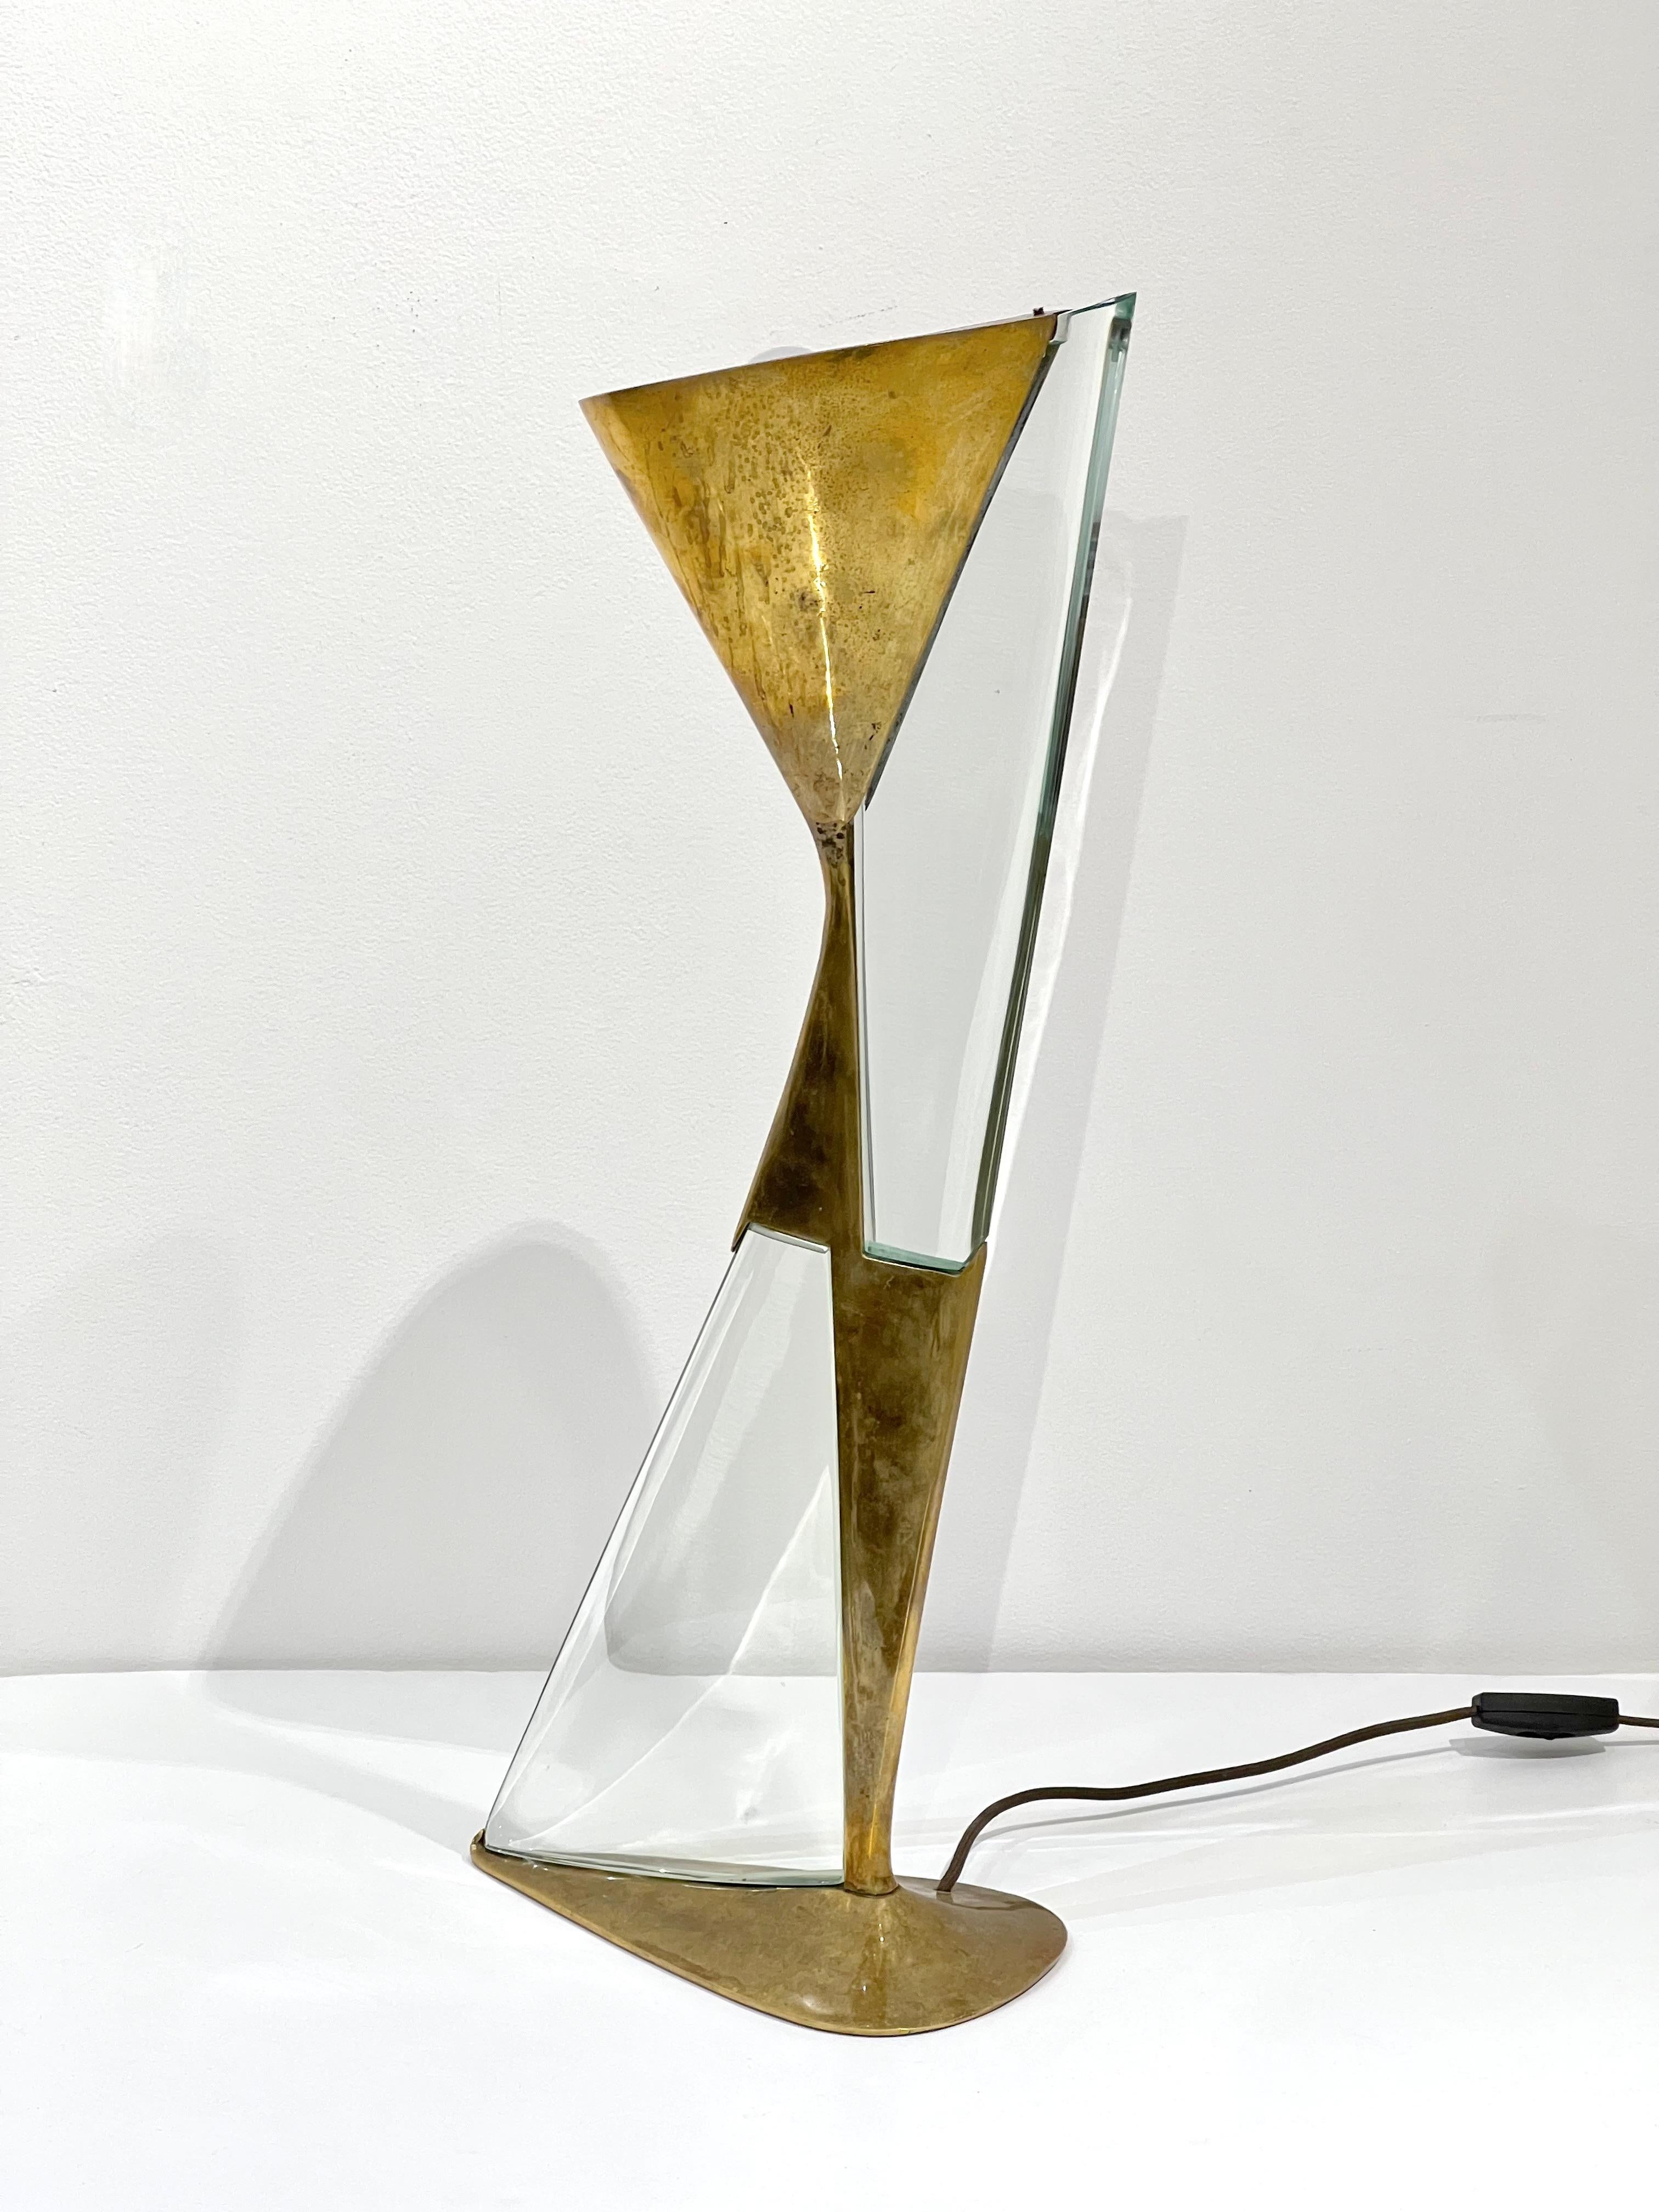 Striking hourglass shaped brass and glass table lamp by Max Ingrand for Fontana Arte. Italy circa 1960's.